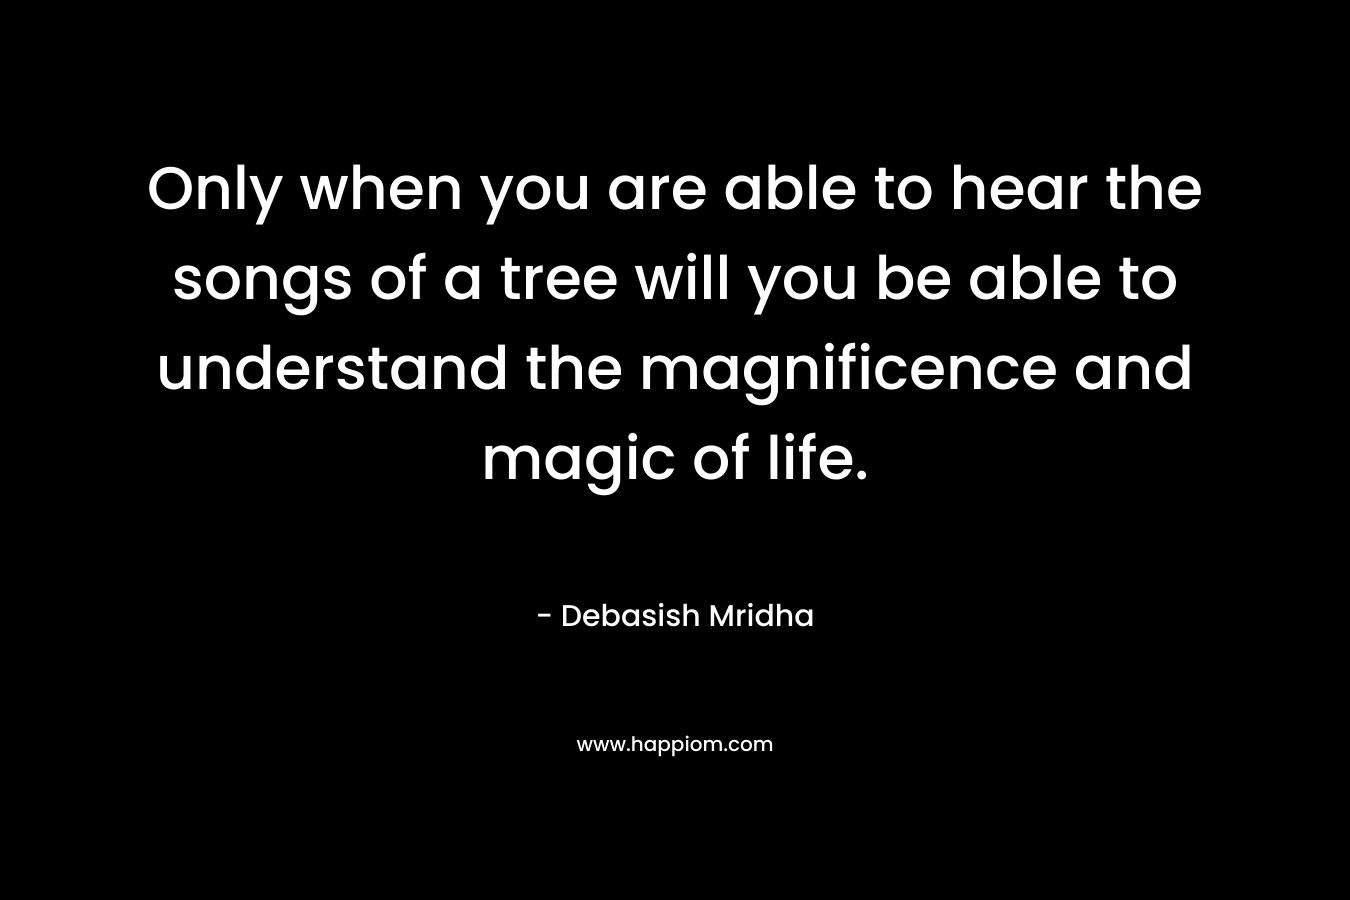 Only when you are able to hear the songs of a tree will you be able to understand the magnificence and magic of life.